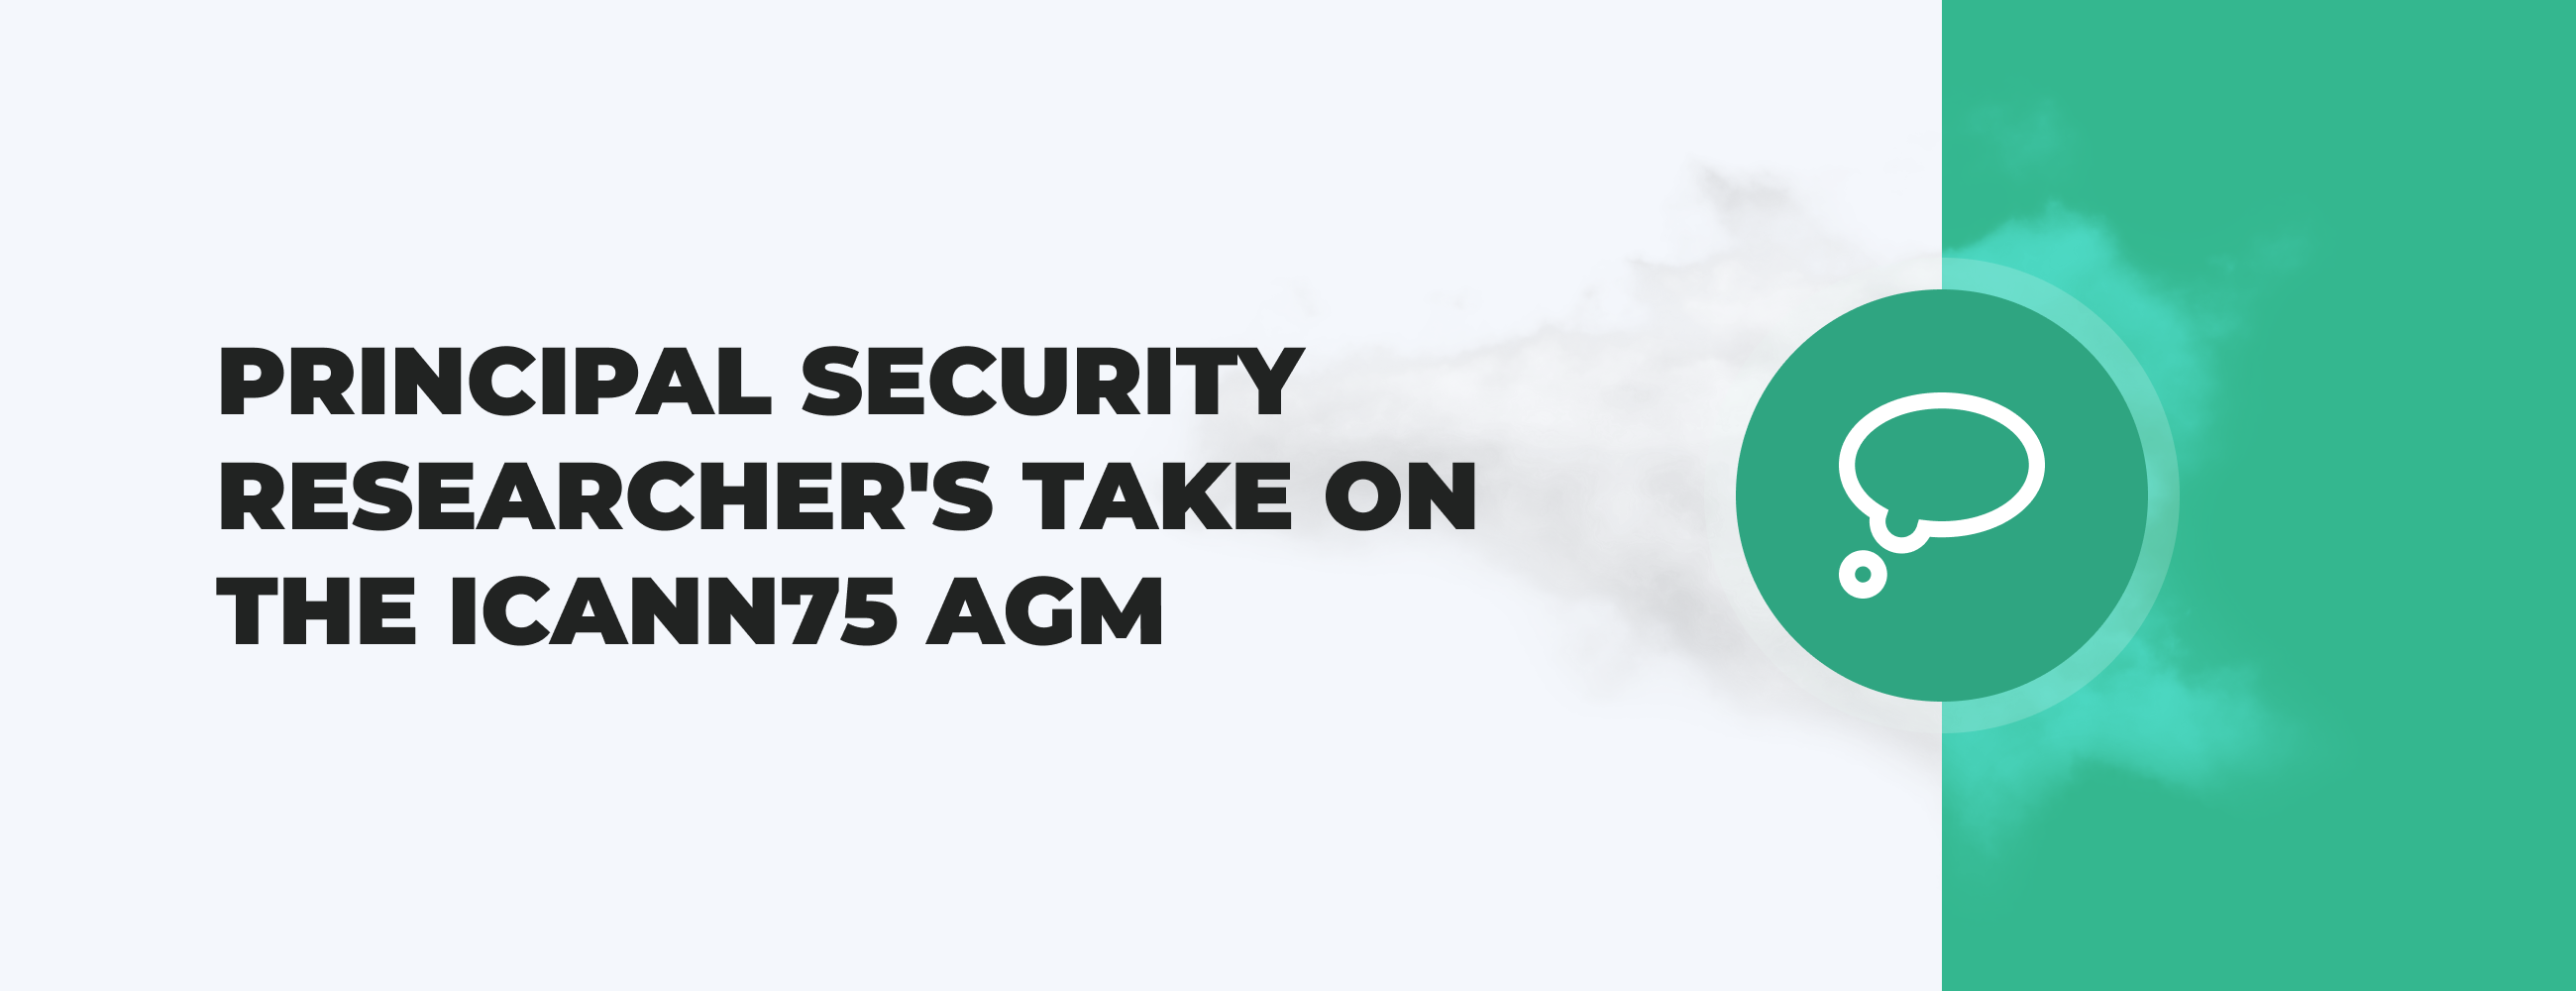 Principal Security Researcher's Take on the ICANN75 AGM